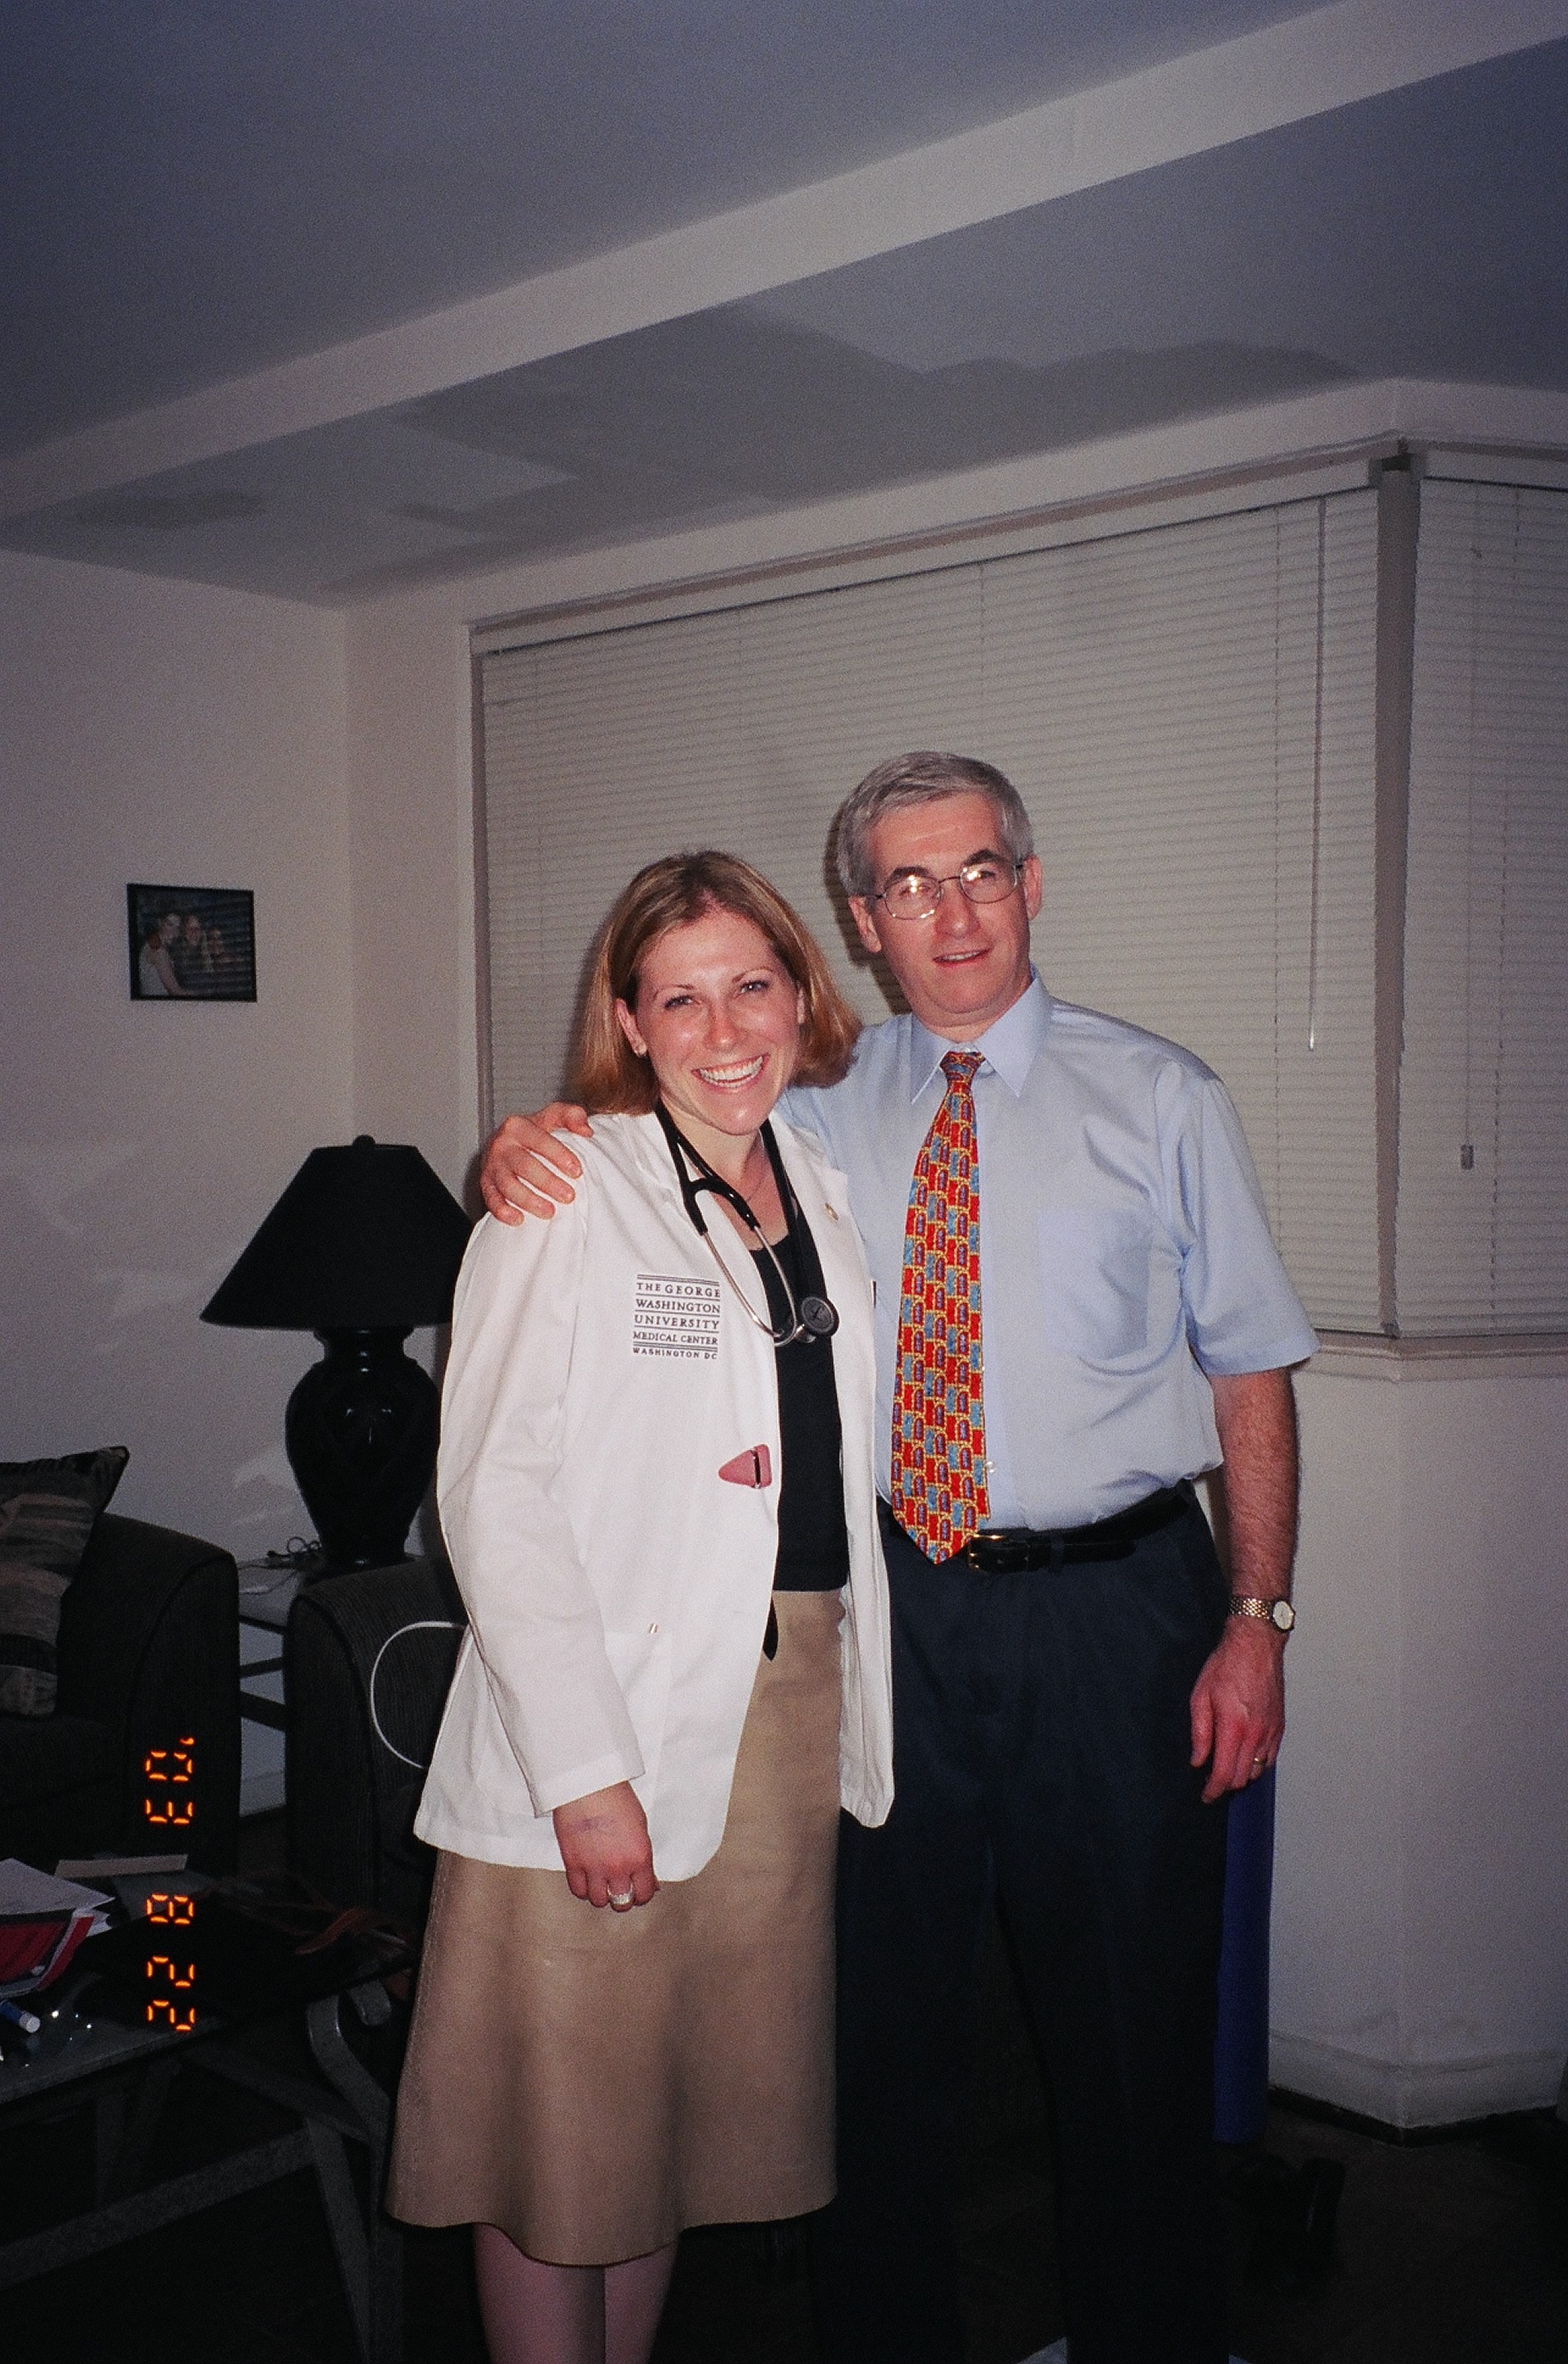 Millie's son, Dr. David Axelrod, with daughter Sara at white coat ceremony